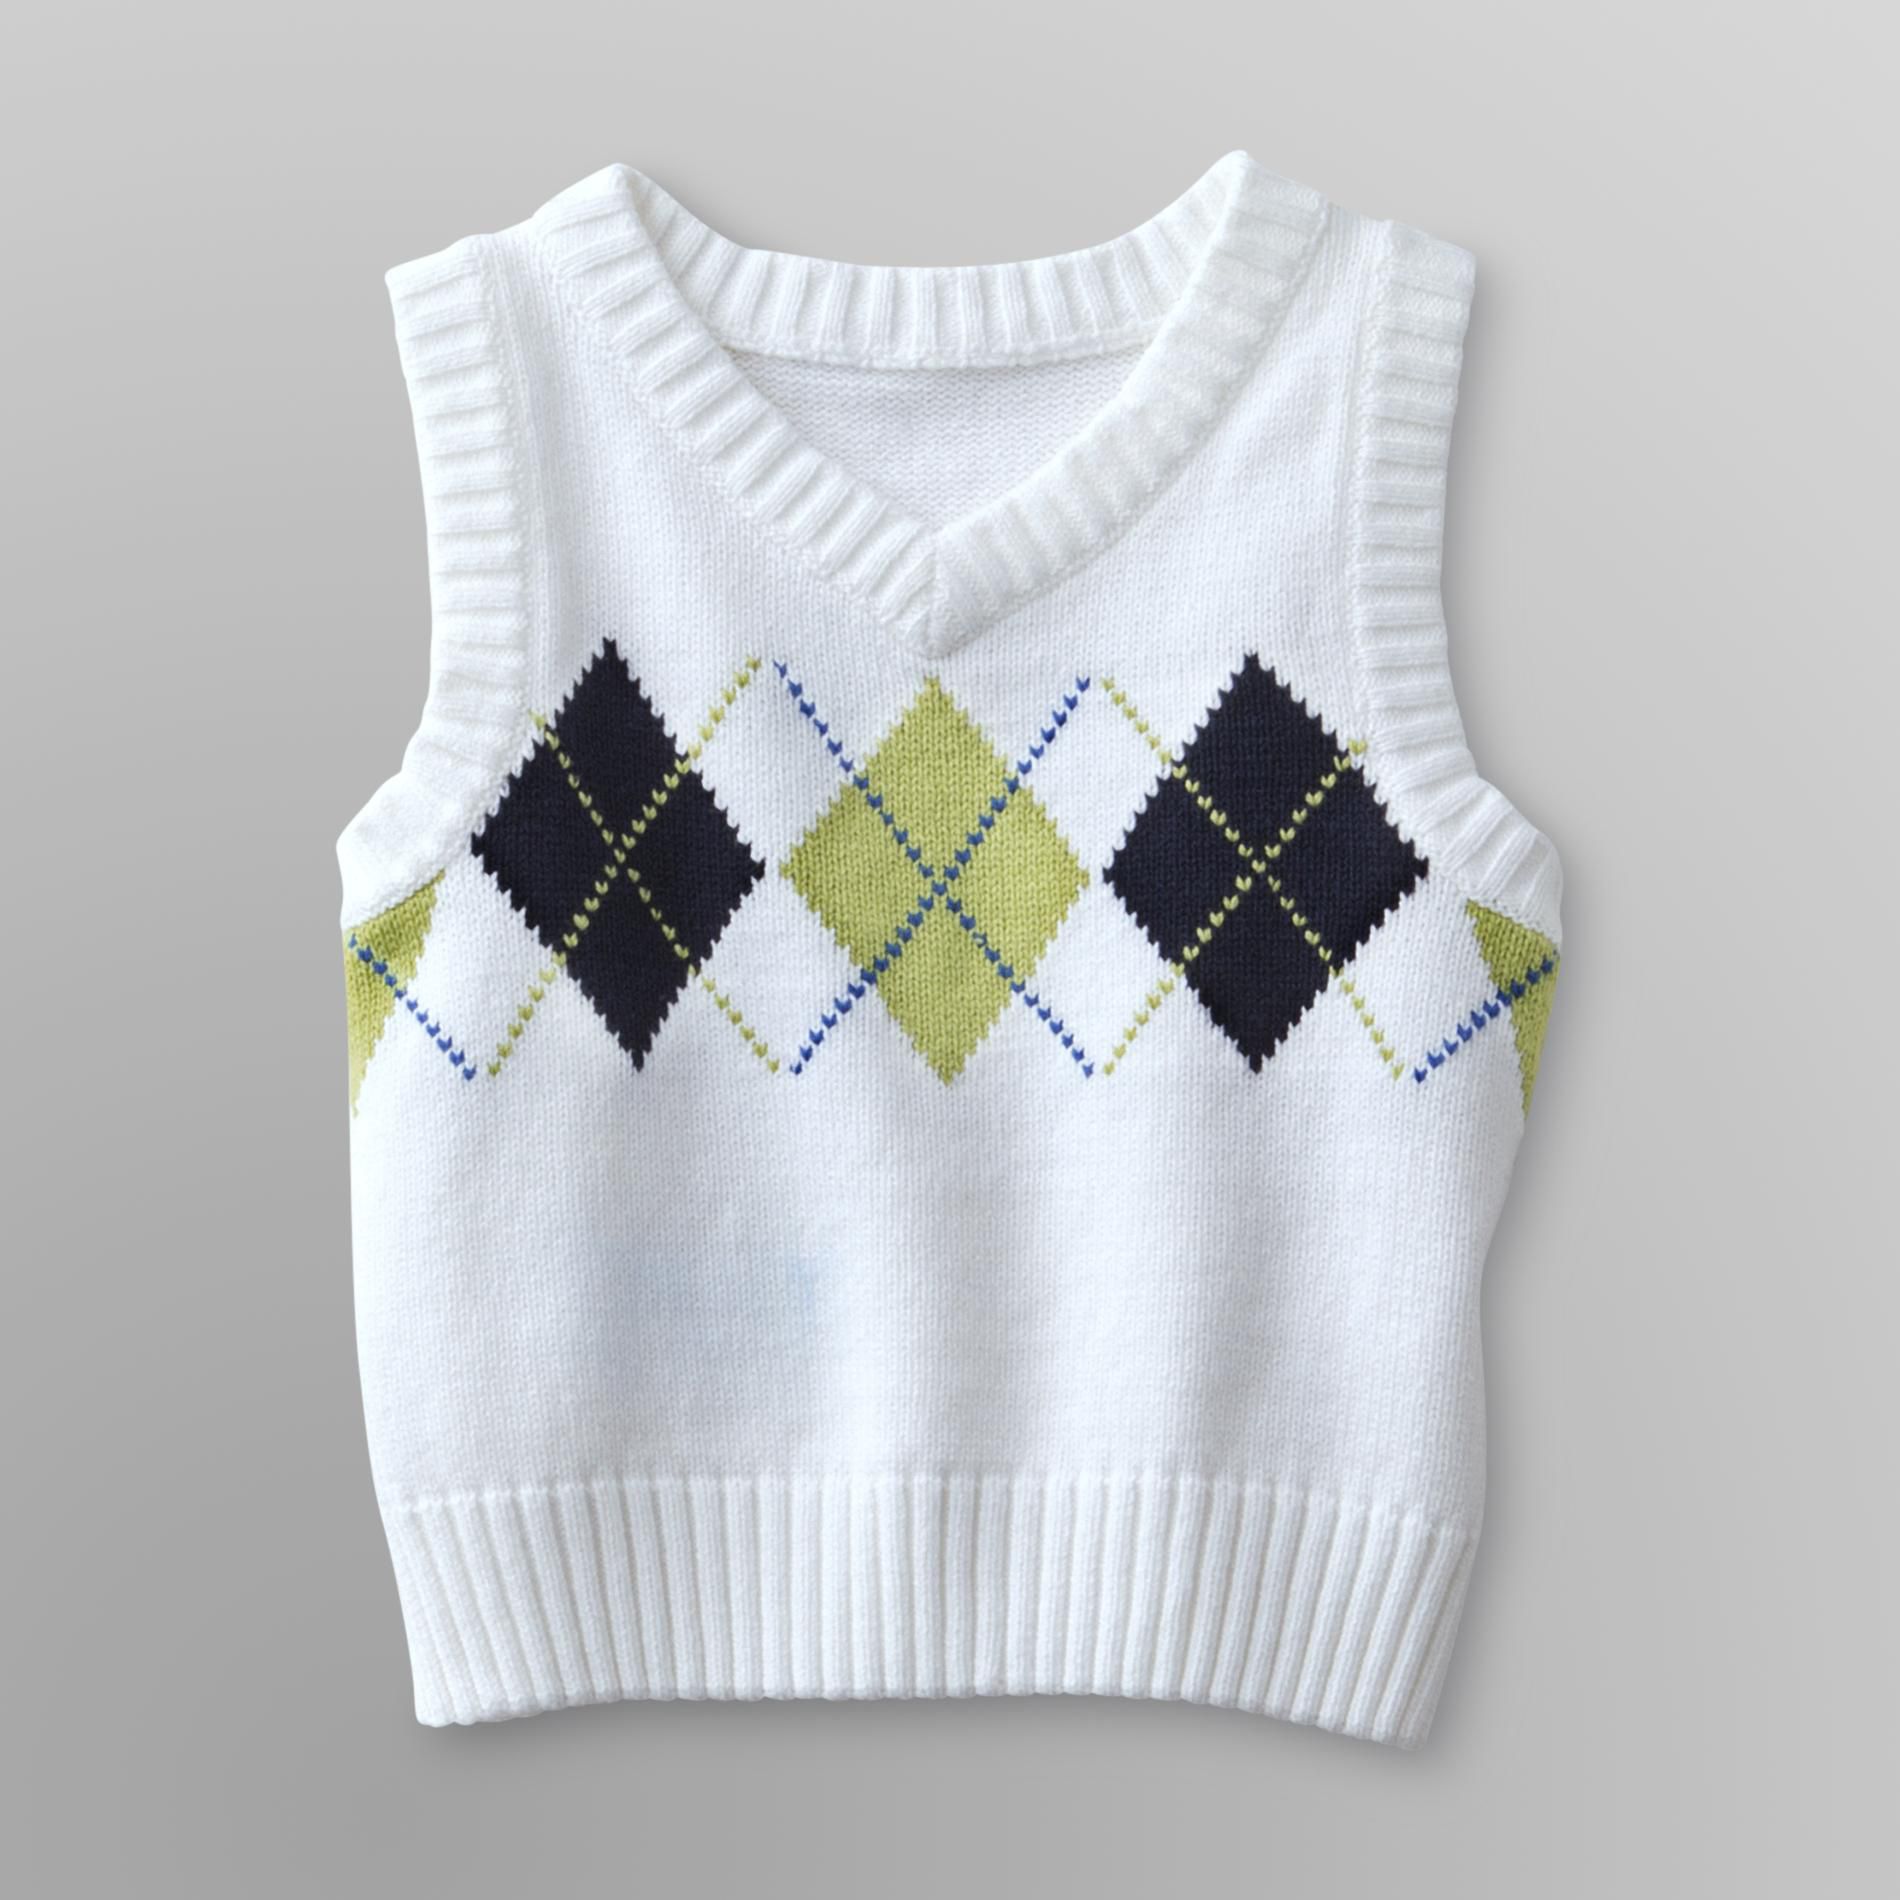 Holiday Editions Infant & Toddler Boy's Sweater Vest - Argyle